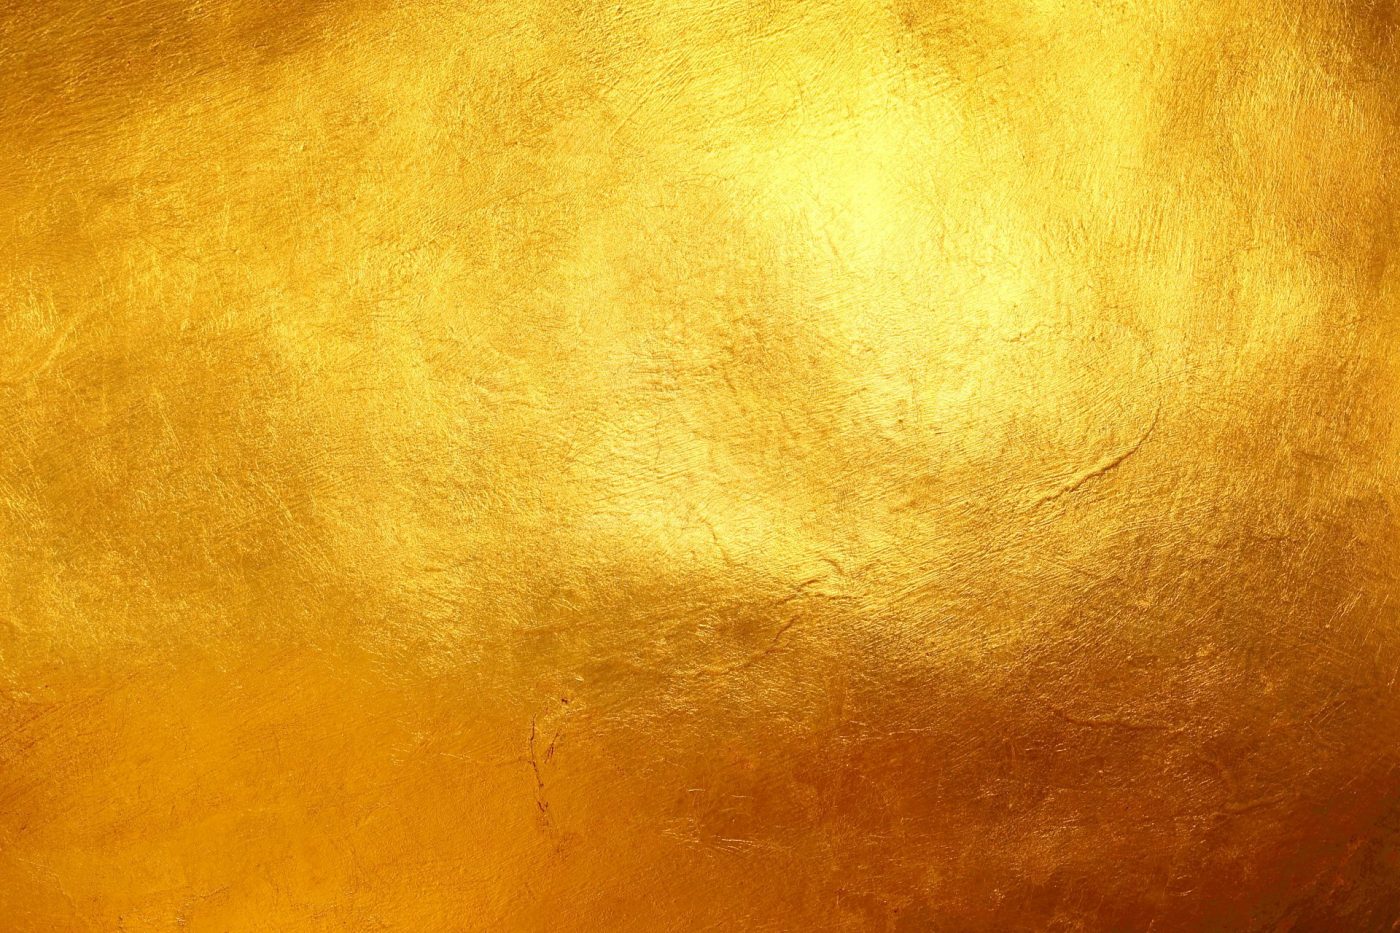  gold  texture  golden  gold  background  Run For The Hills